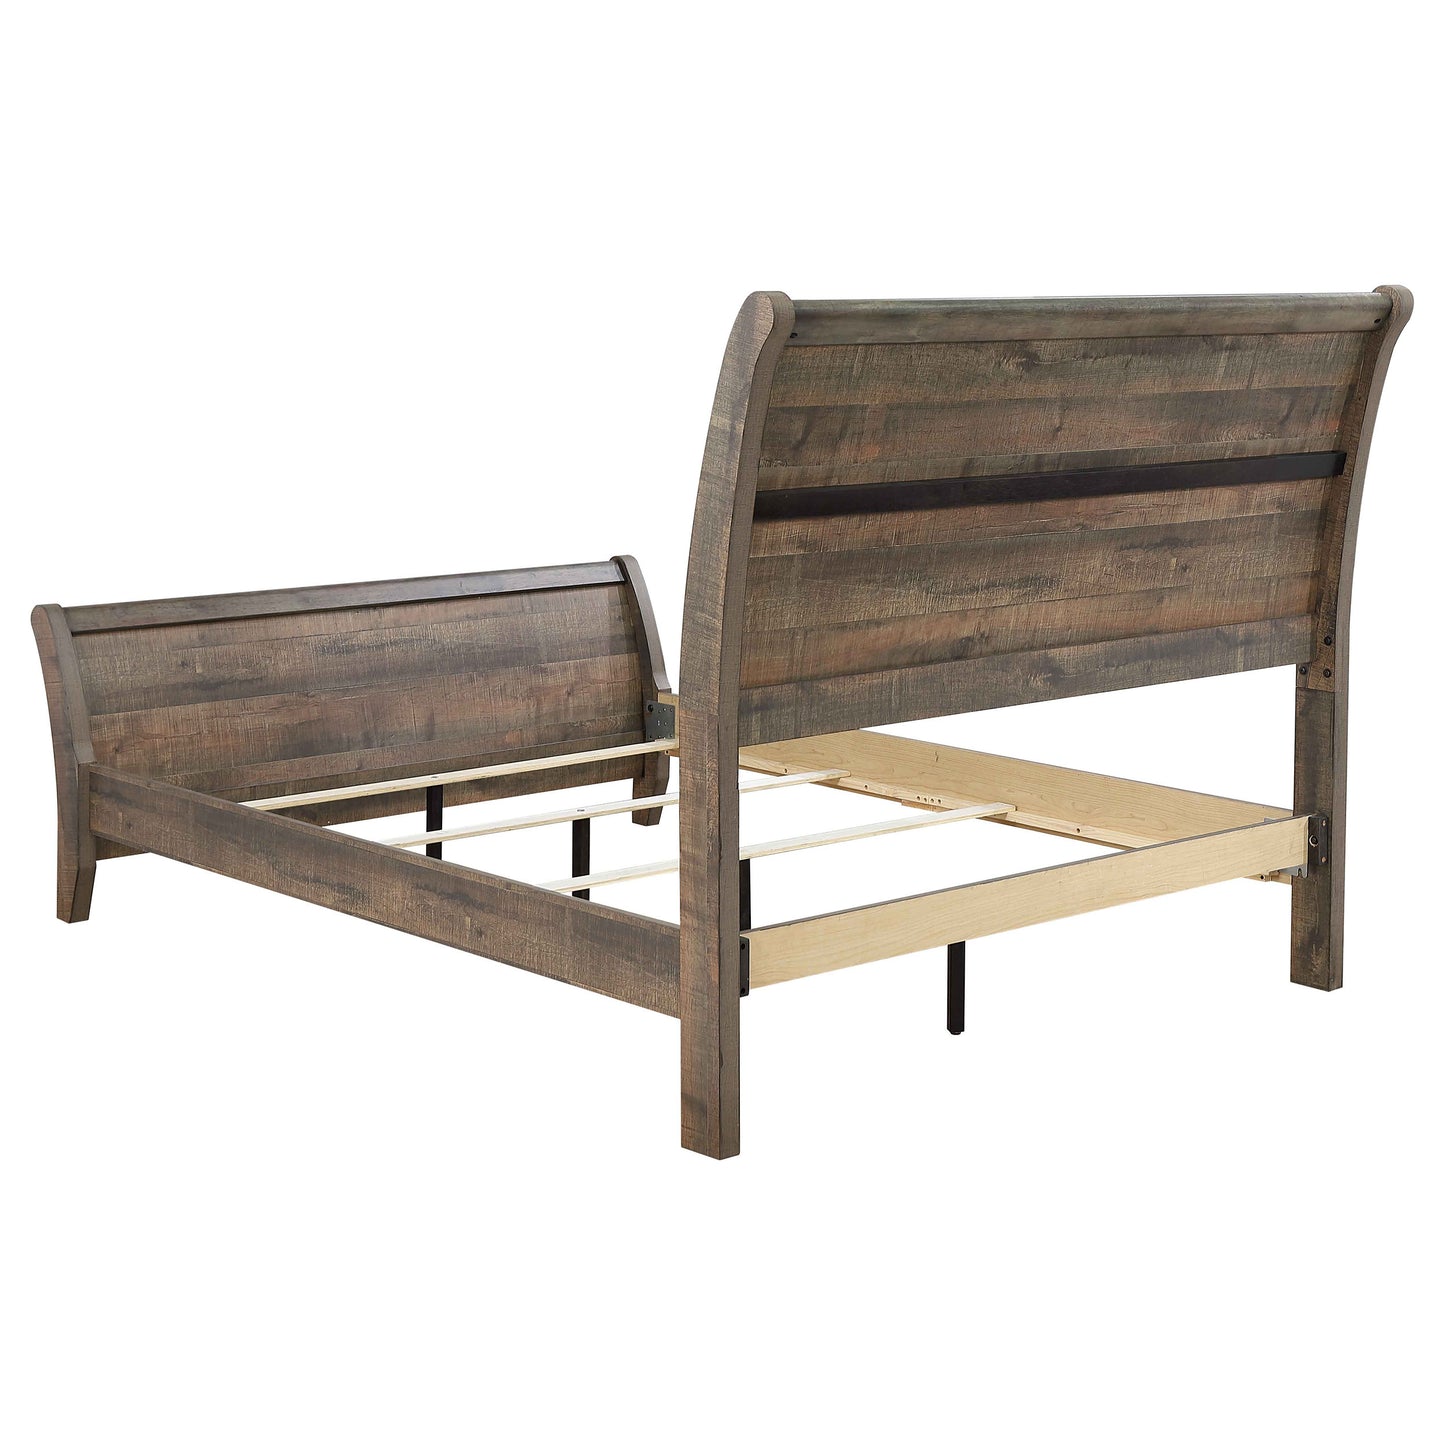 Frederick Wood Queen Sleigh Bed Weathered Oak